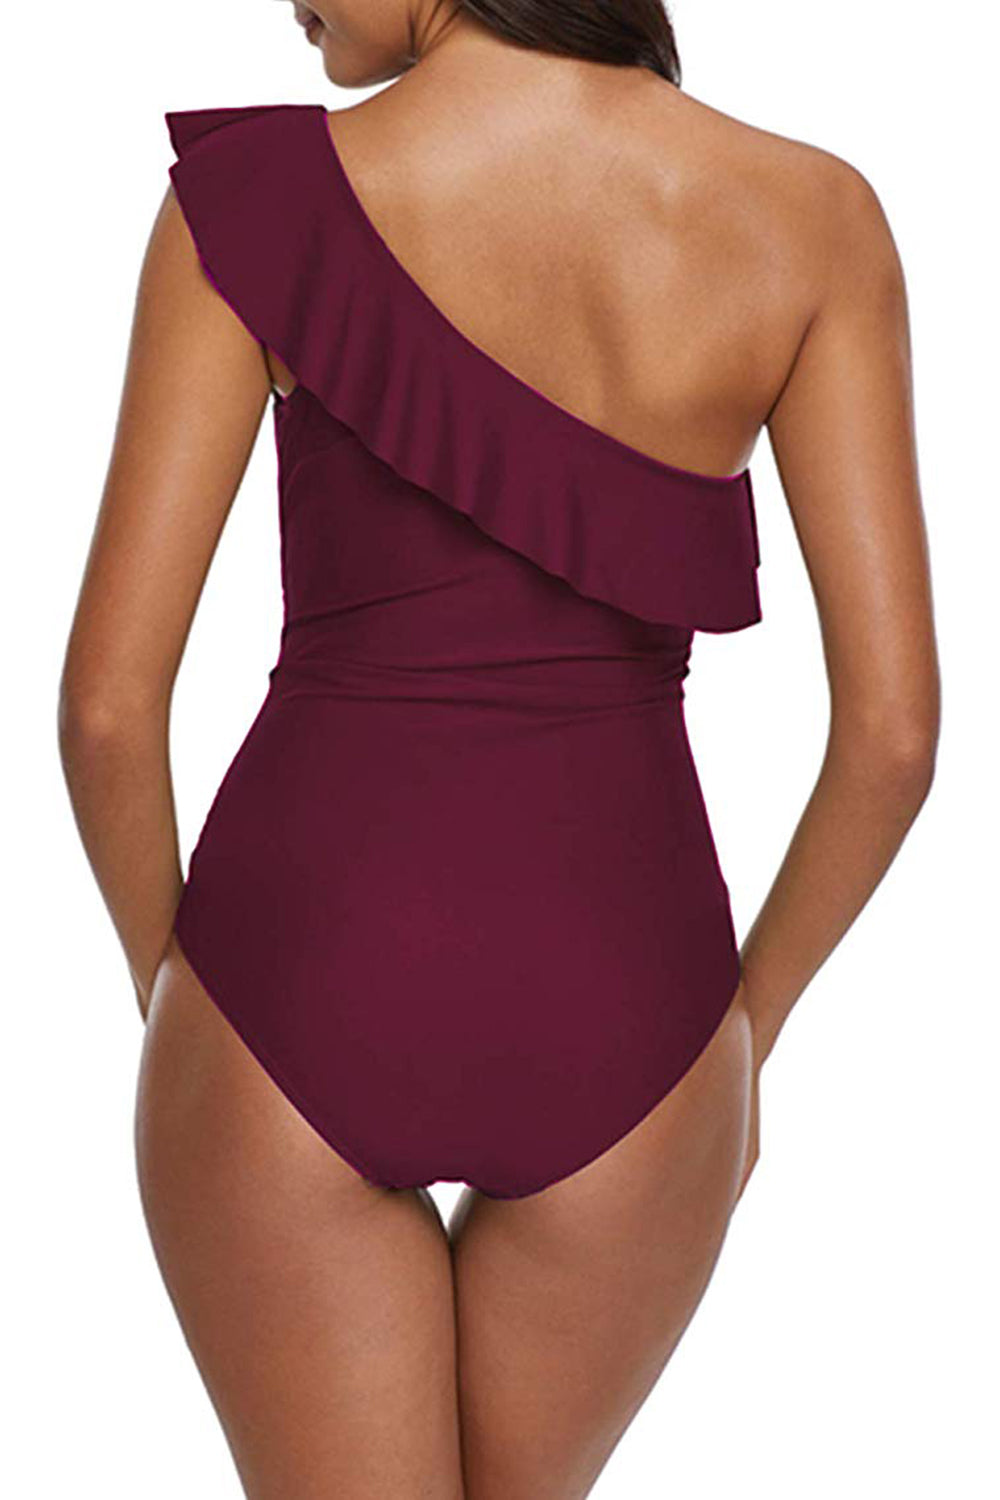 Women's One Shoulder Swimsuits Ruffle One Piece